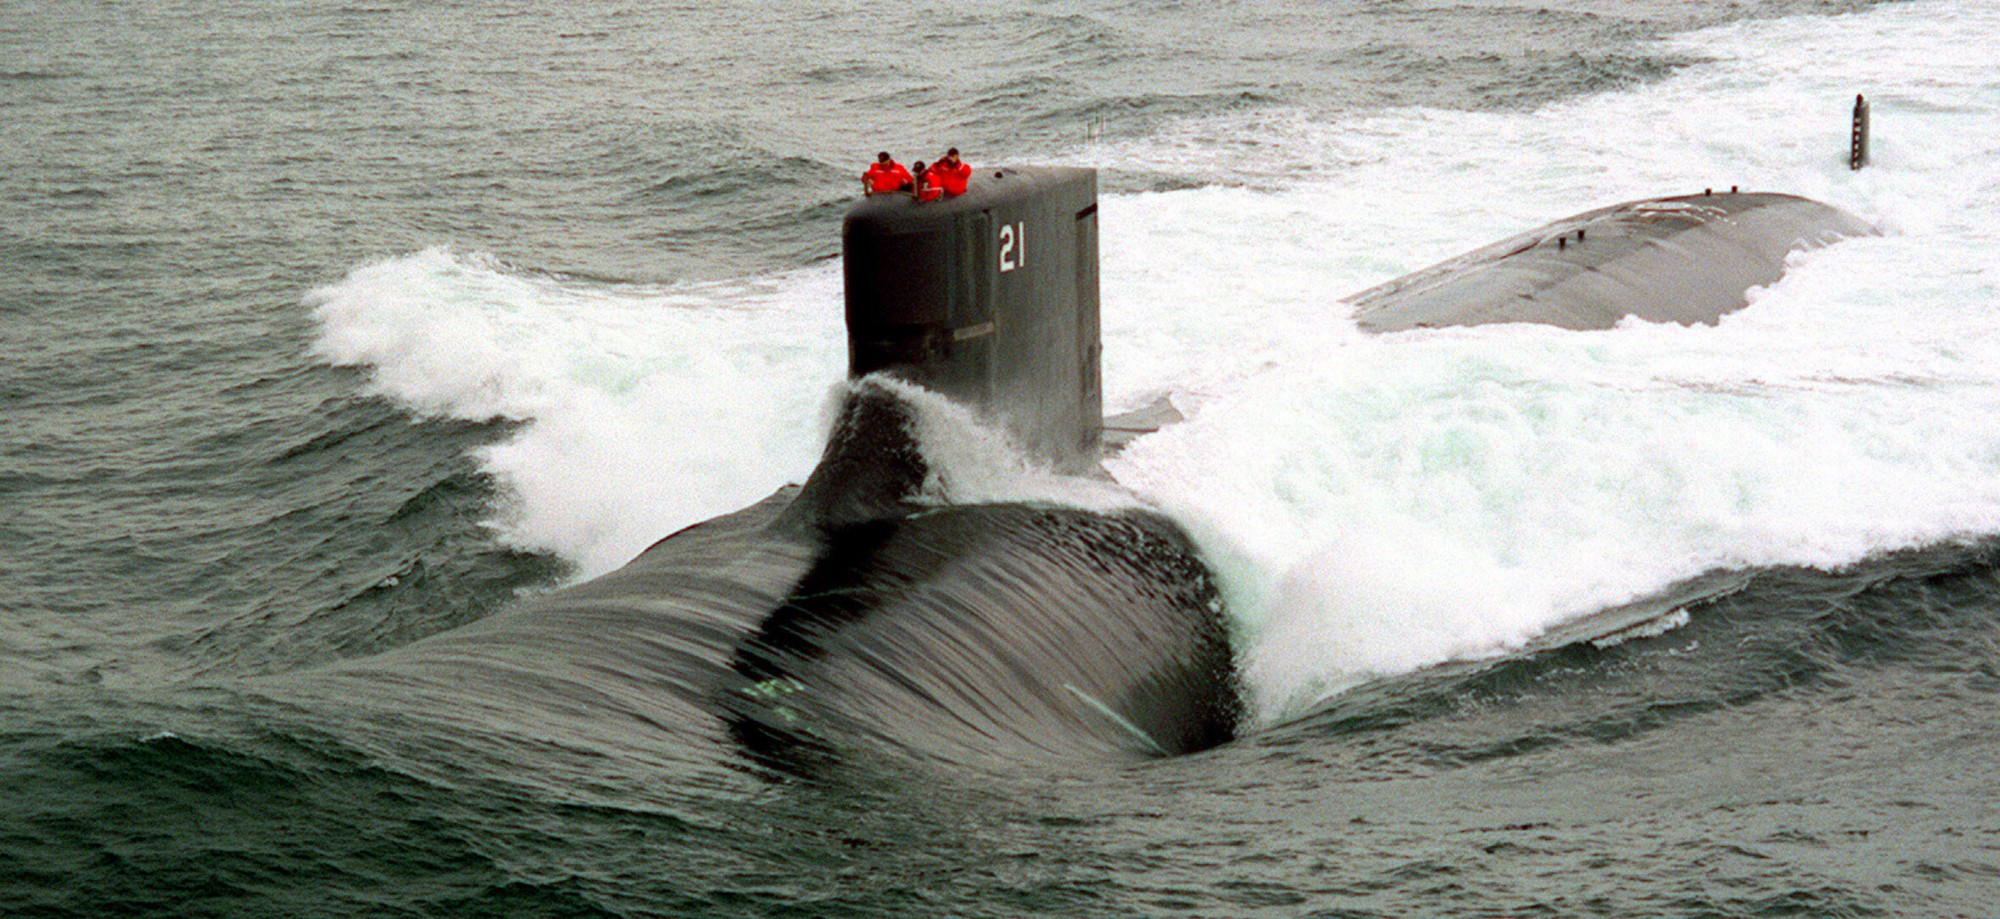 ssn-21 uss seawolf attack submarine us navy trials general dynamics electric boat groton 33